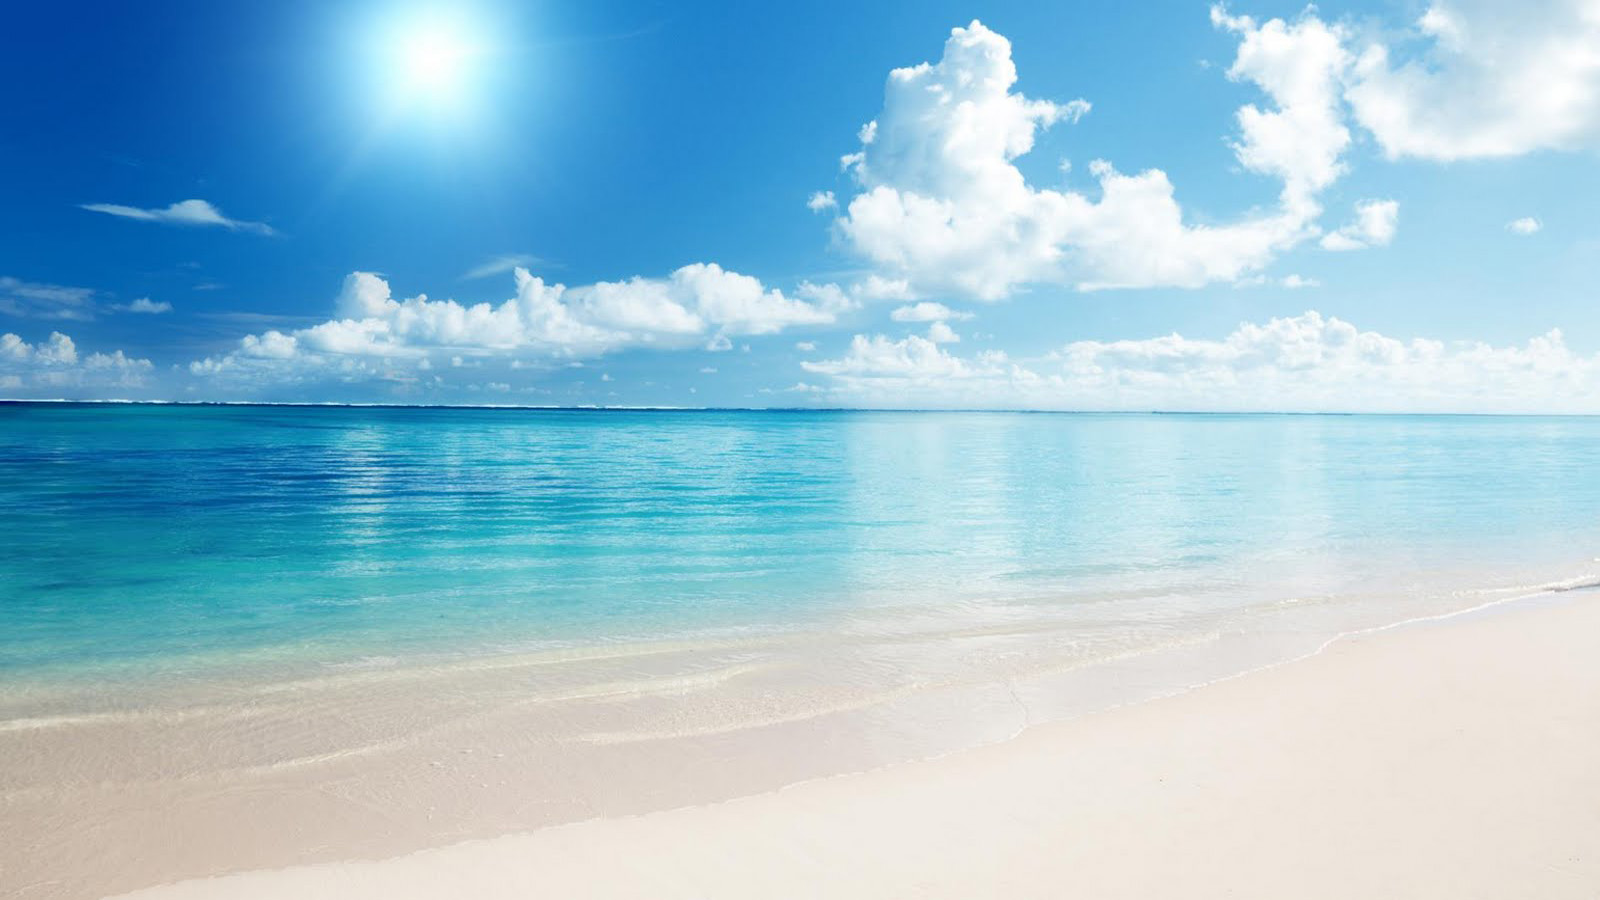 Beautiful Sunny Beach Wallpaper photos of How to Beautify Your